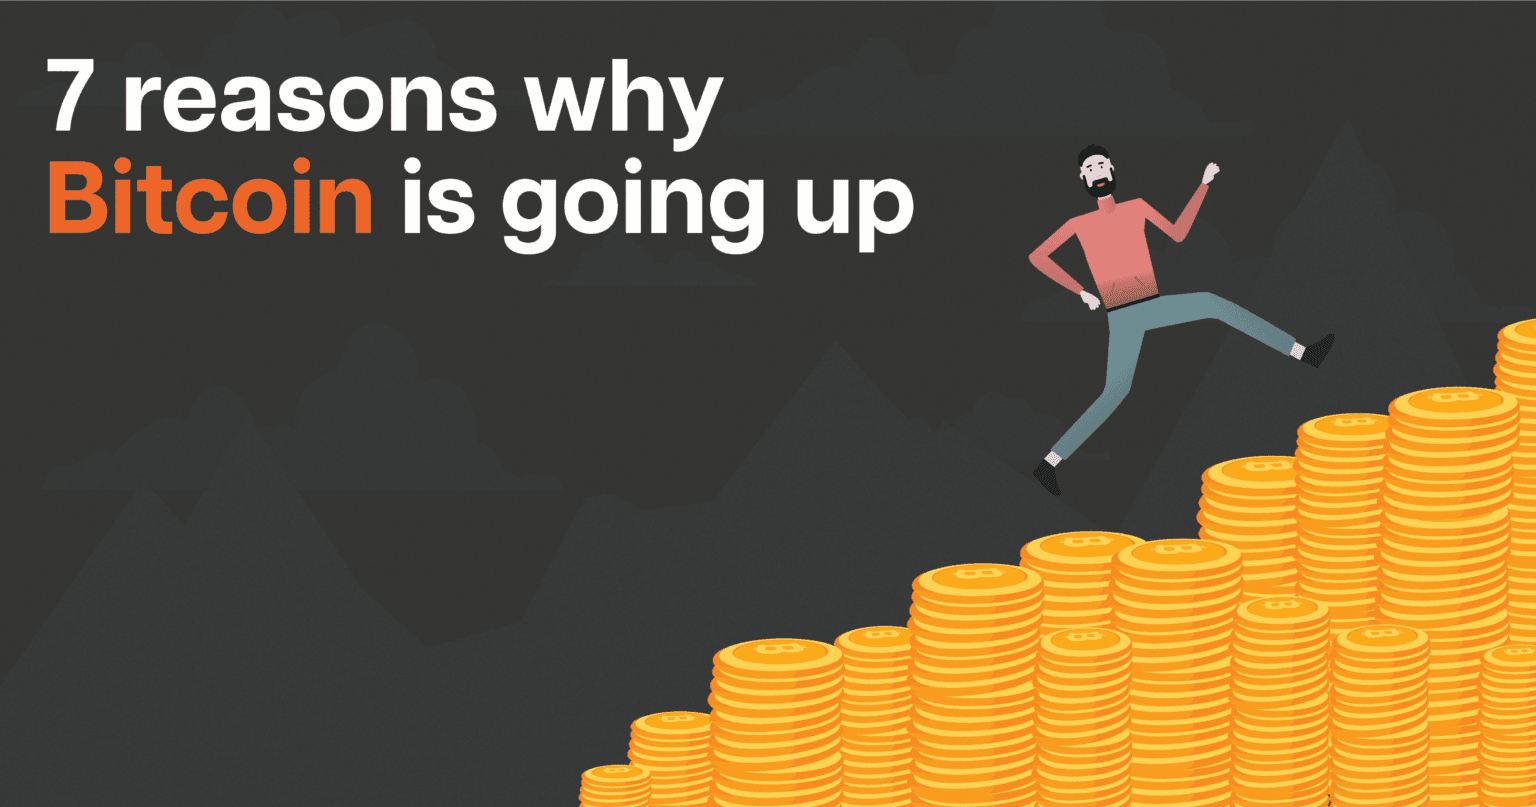 7 reasons why Bitcoin is going up